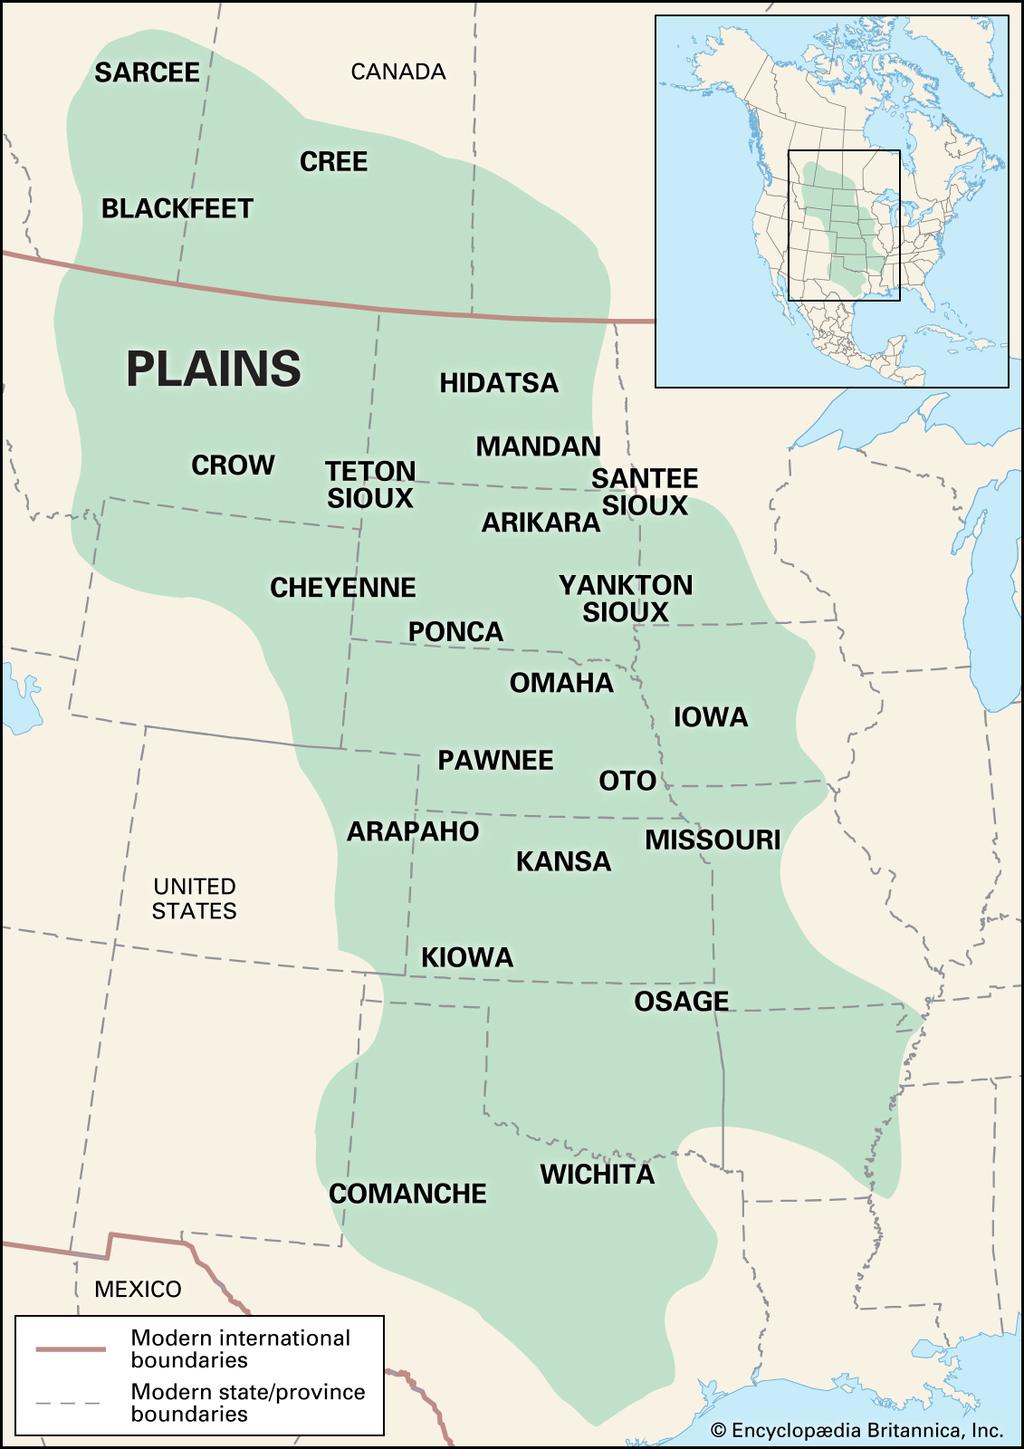 Plains Native Americans traditionally lived on the Great Plains. The Great Plains is a vast grassland at the center of North America.